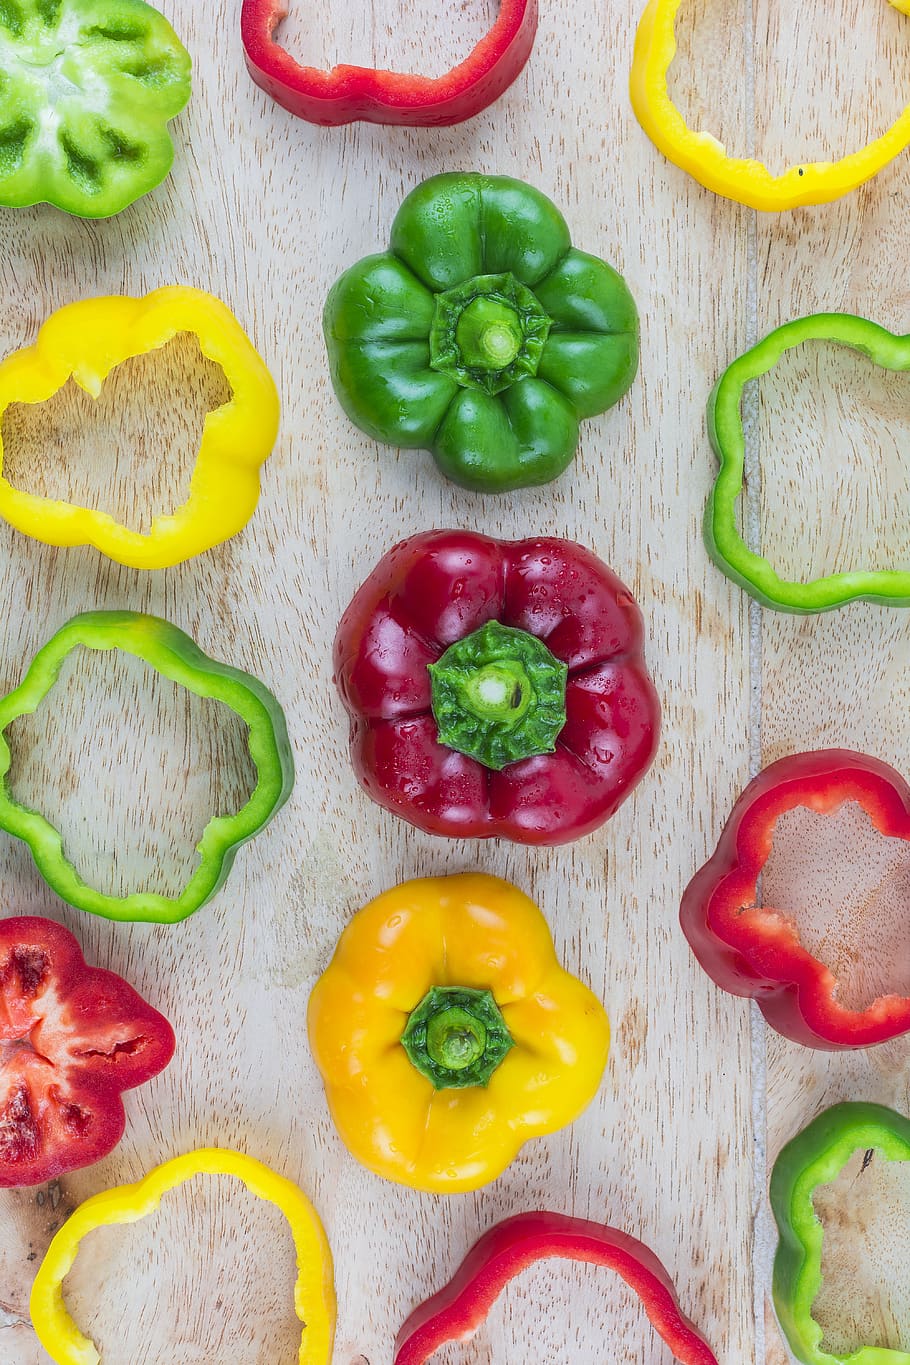 multicolored, sweet, pepper, wooden, placed, food and drink, food, vegetable, freshness, bell pepper